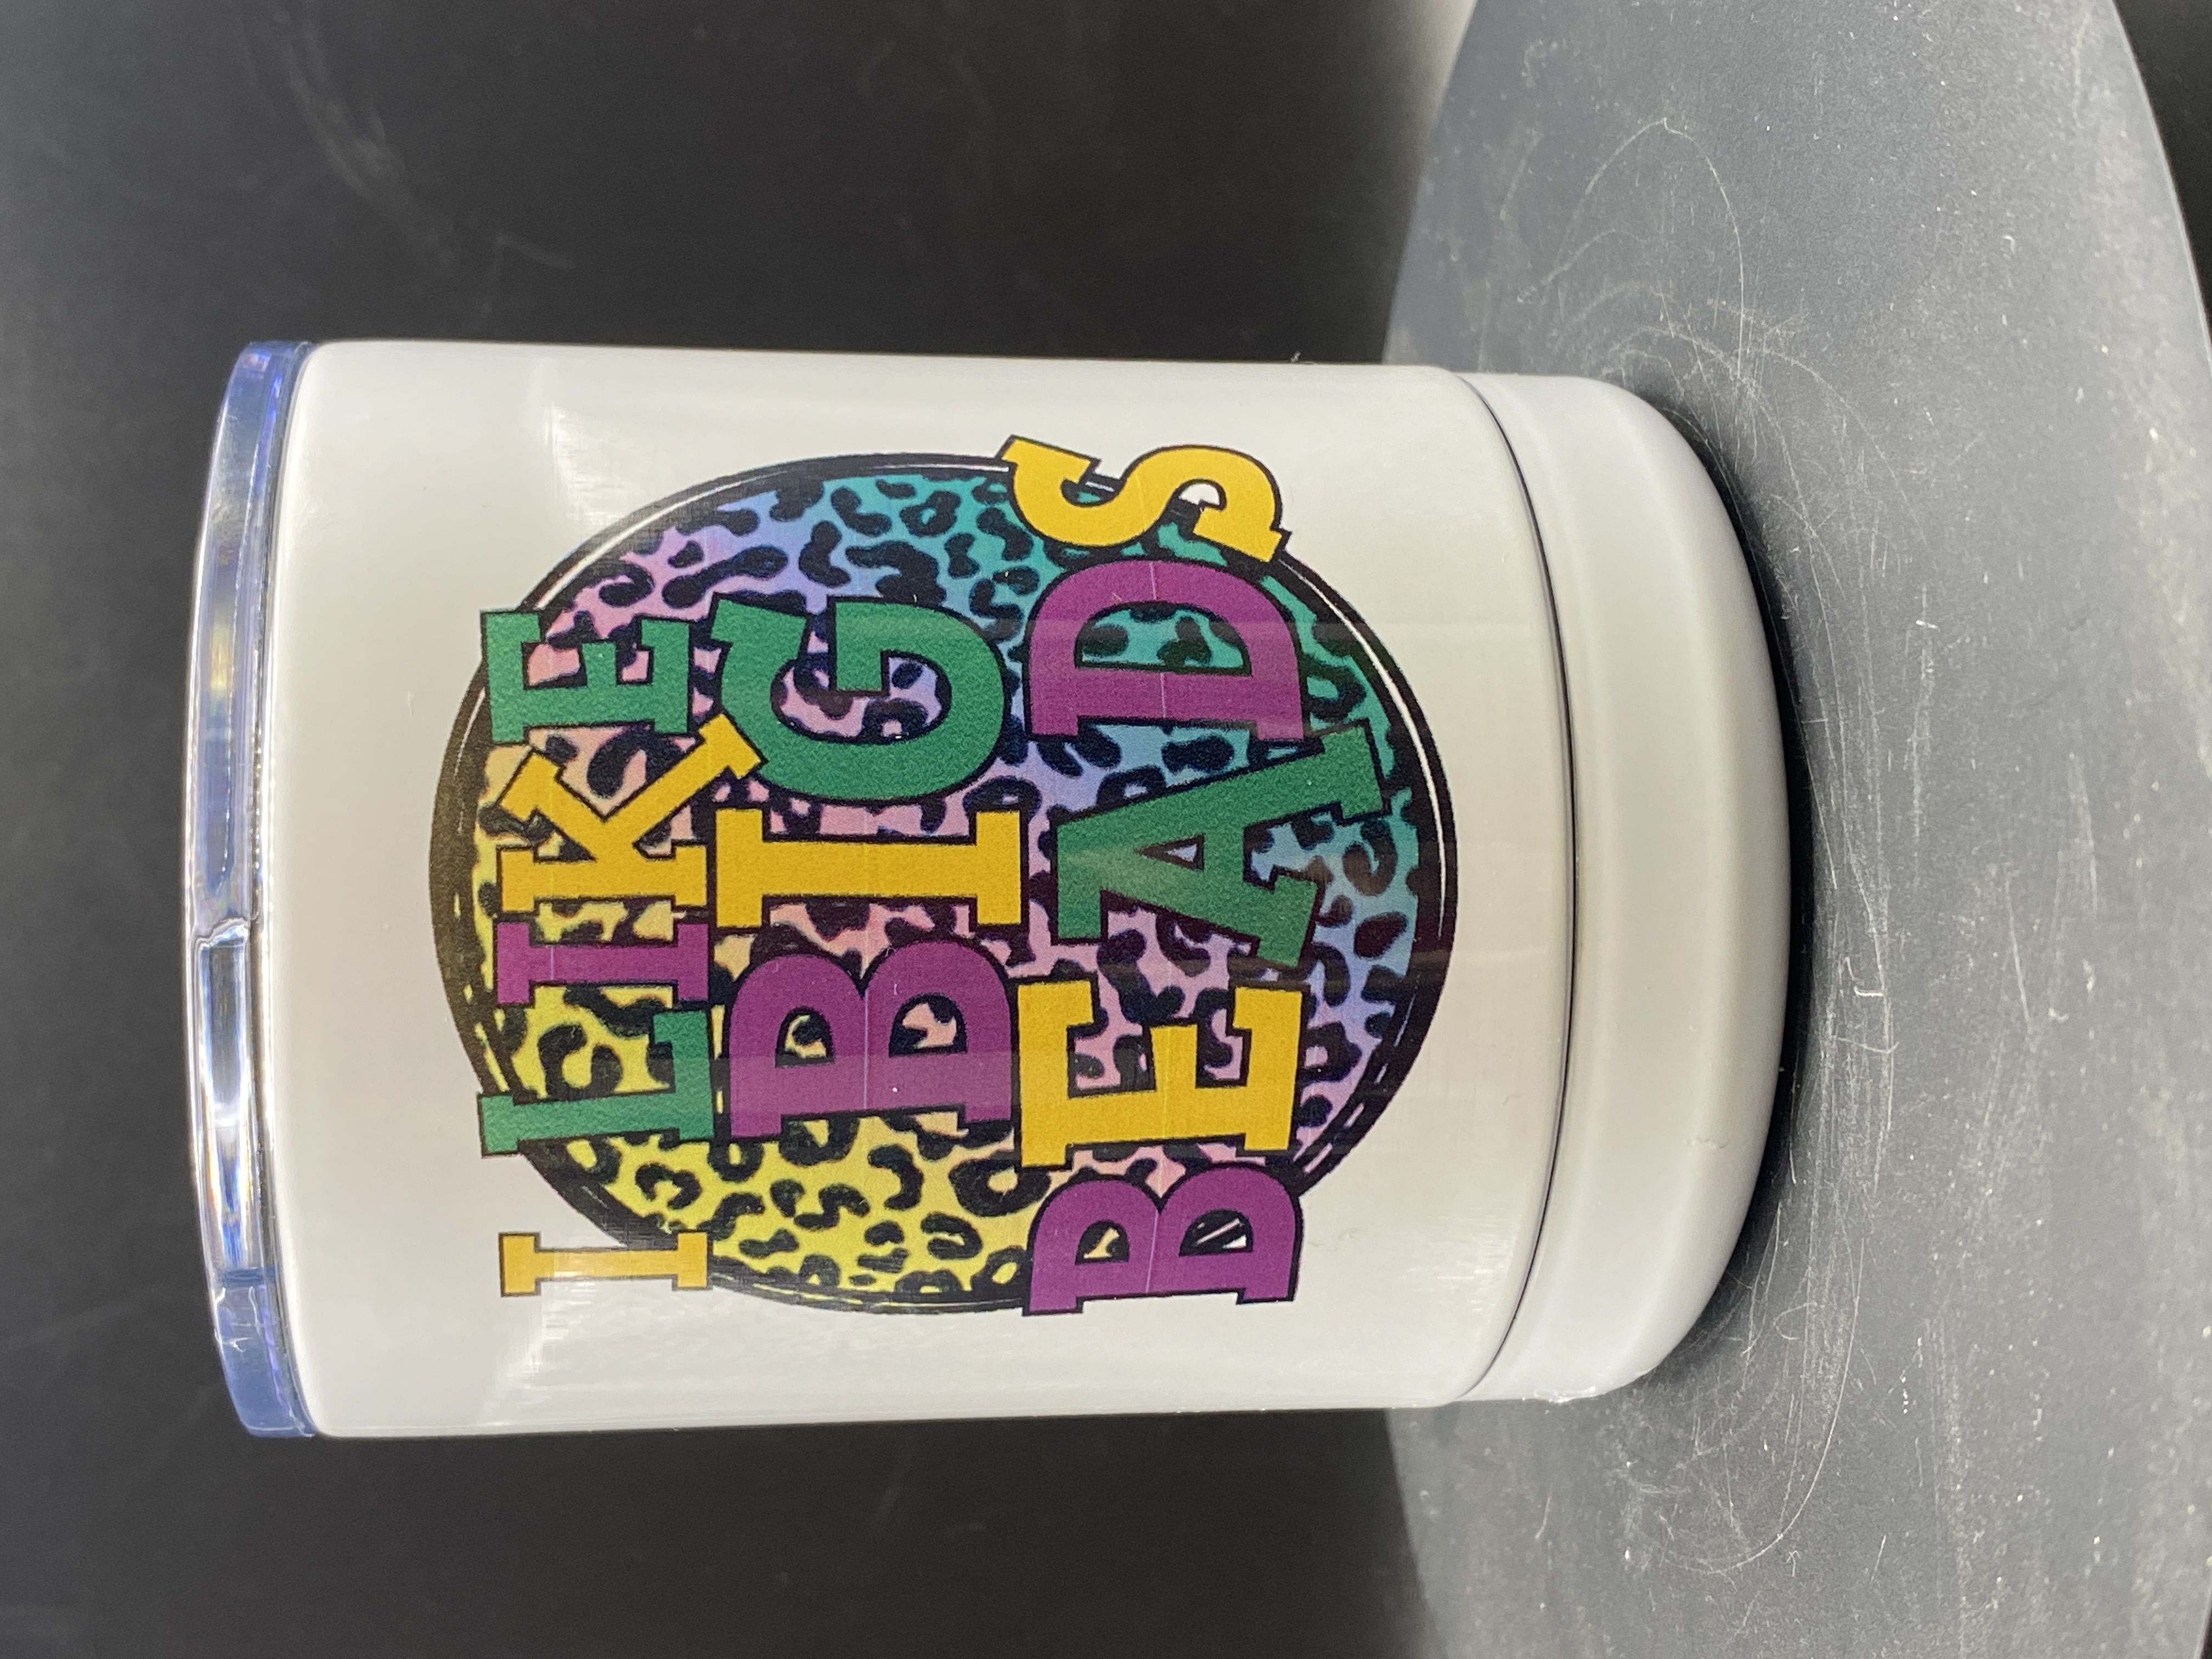 Mardi Gras travel tumbler that's perfect for a day watching parades downtown.